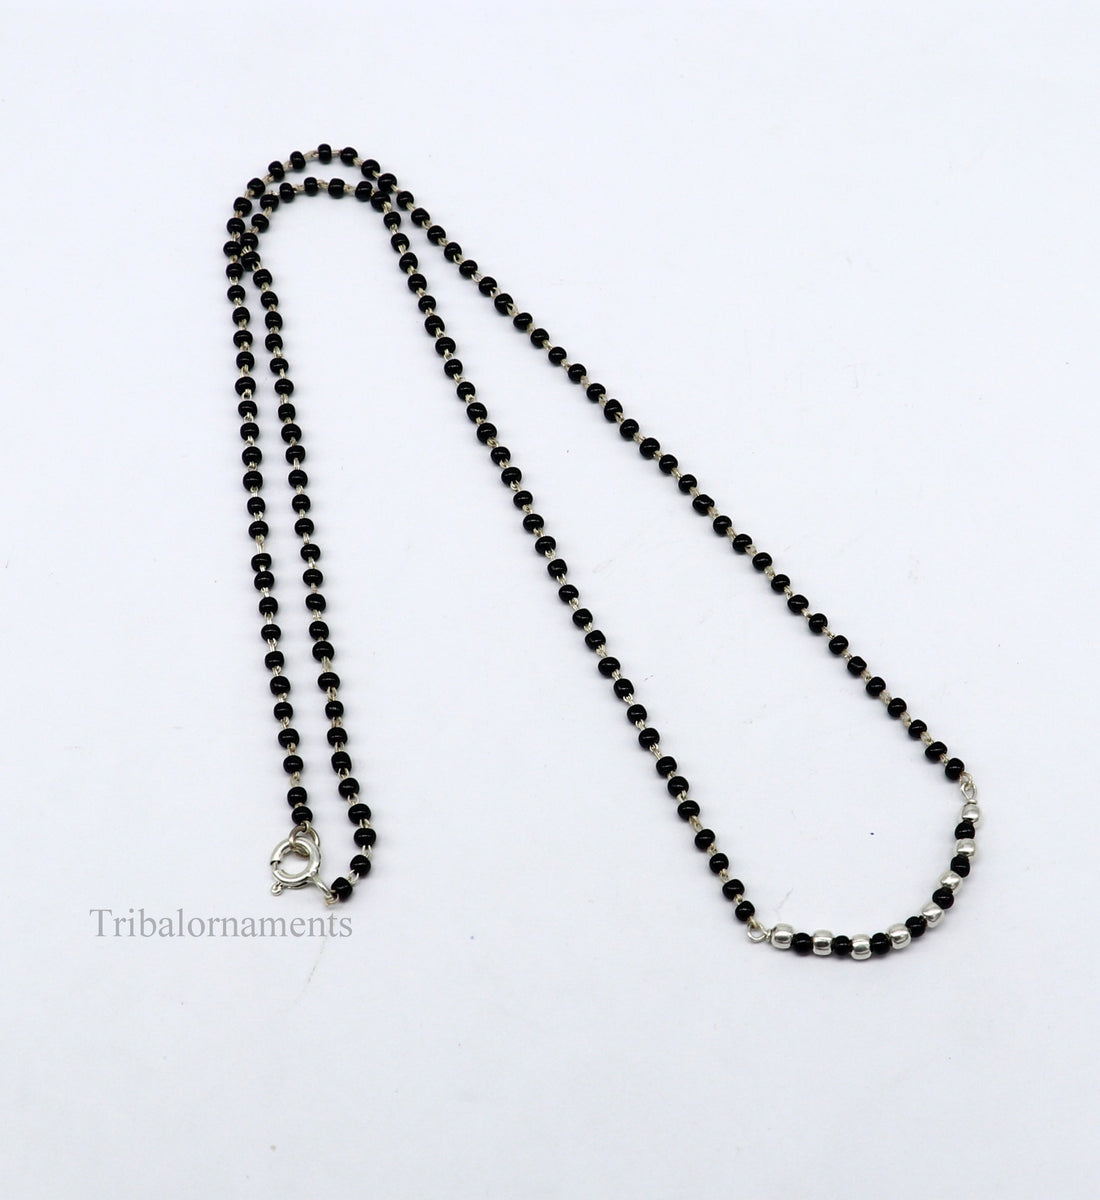 925 sterling silver black beads chain necklace, gorgeous small jingling bells design pendant, traditional style chain beaded necklace set228 - TRIBAL ORNAMENTS